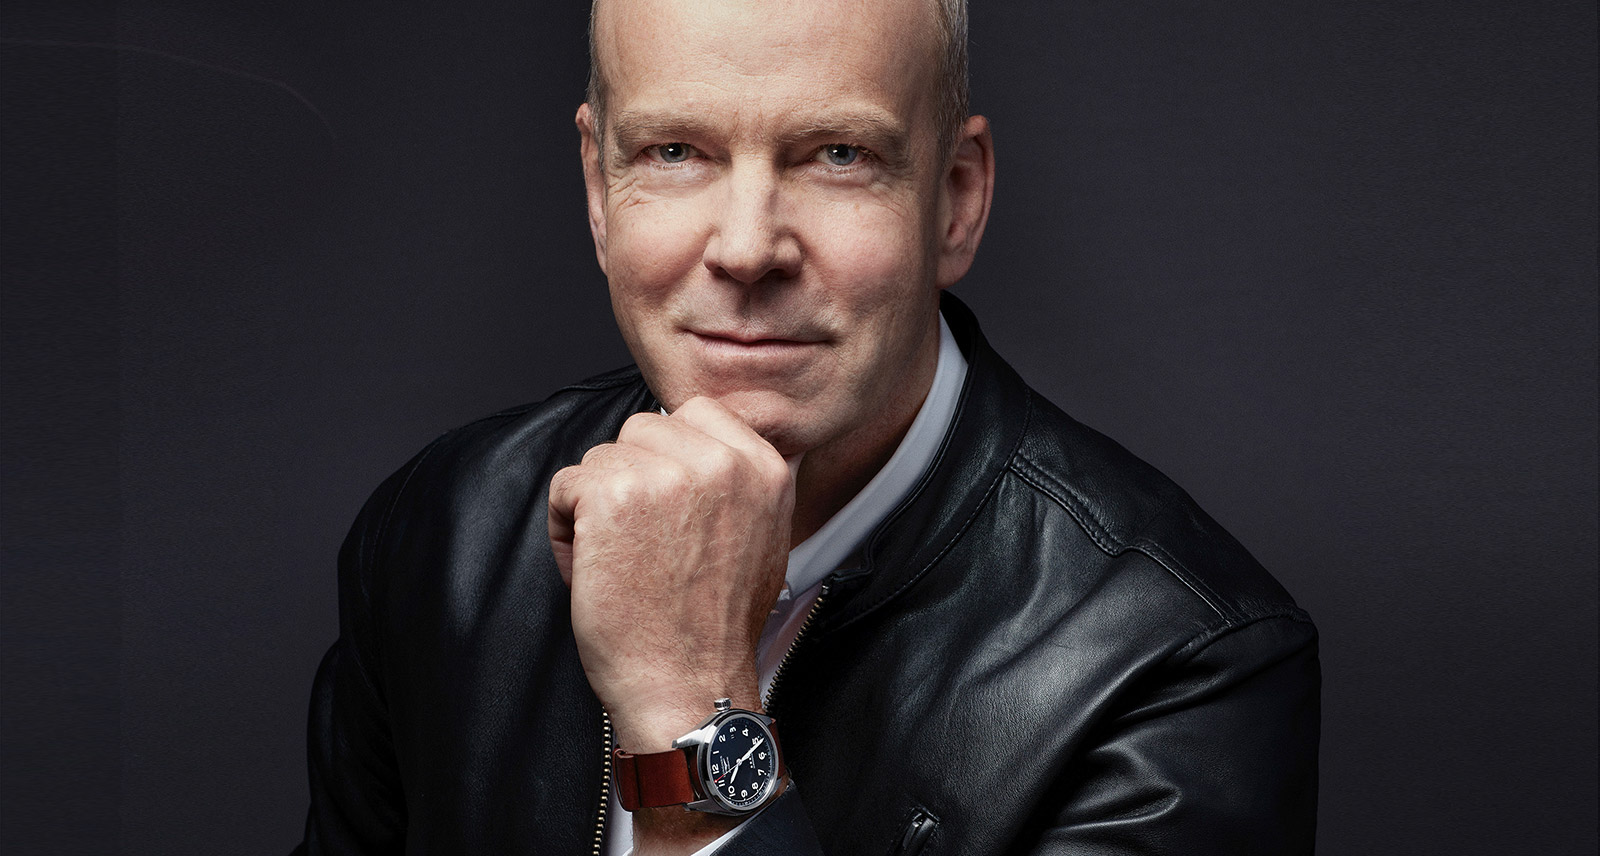 What's the Appeal of a Swiss Mechanical Watch in 2021? Just Ask Longines CEO Matthias Breschan